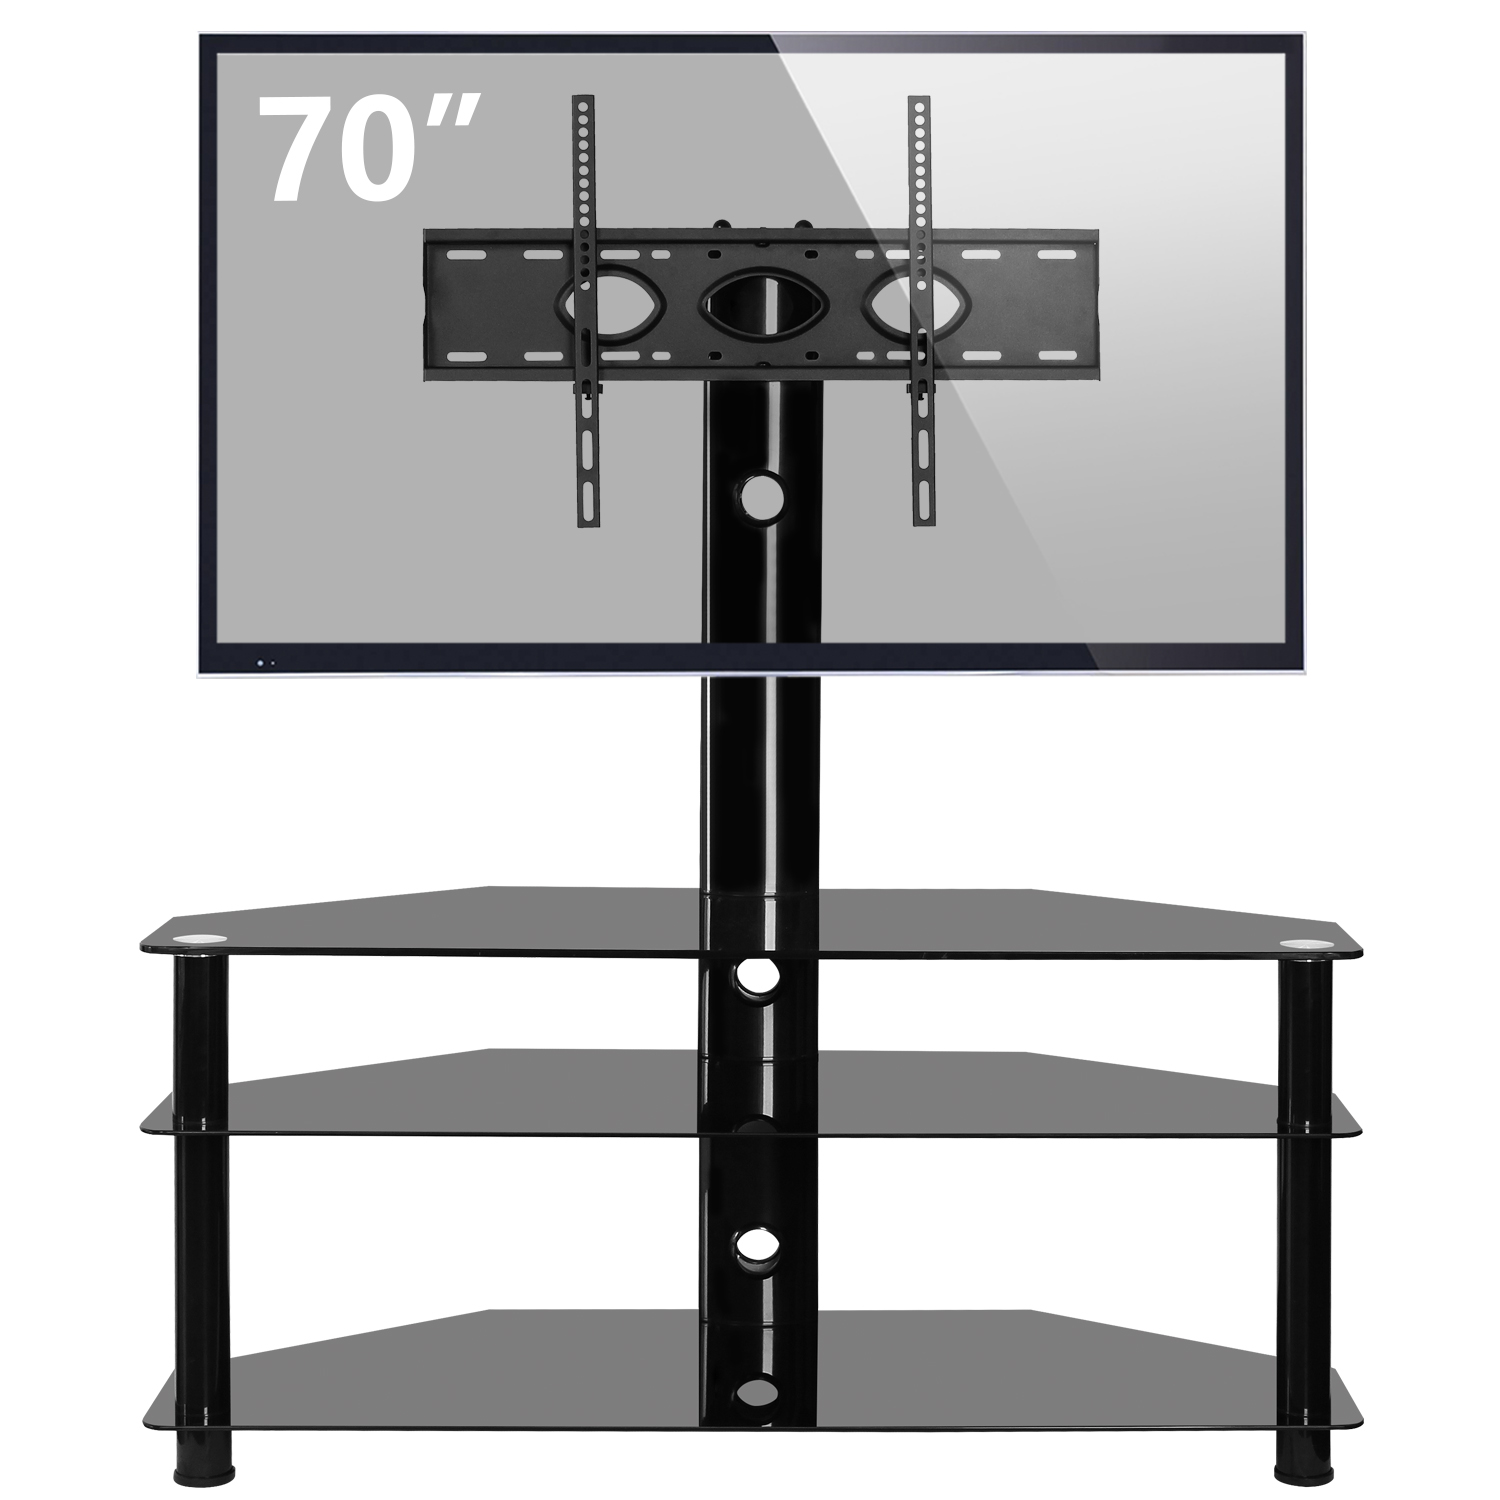 Mobile Trolley Cart Walnut TS5002 RFIVER TV Stand Console Table with Storage Entertainment TV Unit Media Cabinet Audio Rack with Wheel Castors and Adjustable Shelves for Most 26-50 Plasma LED LCD 